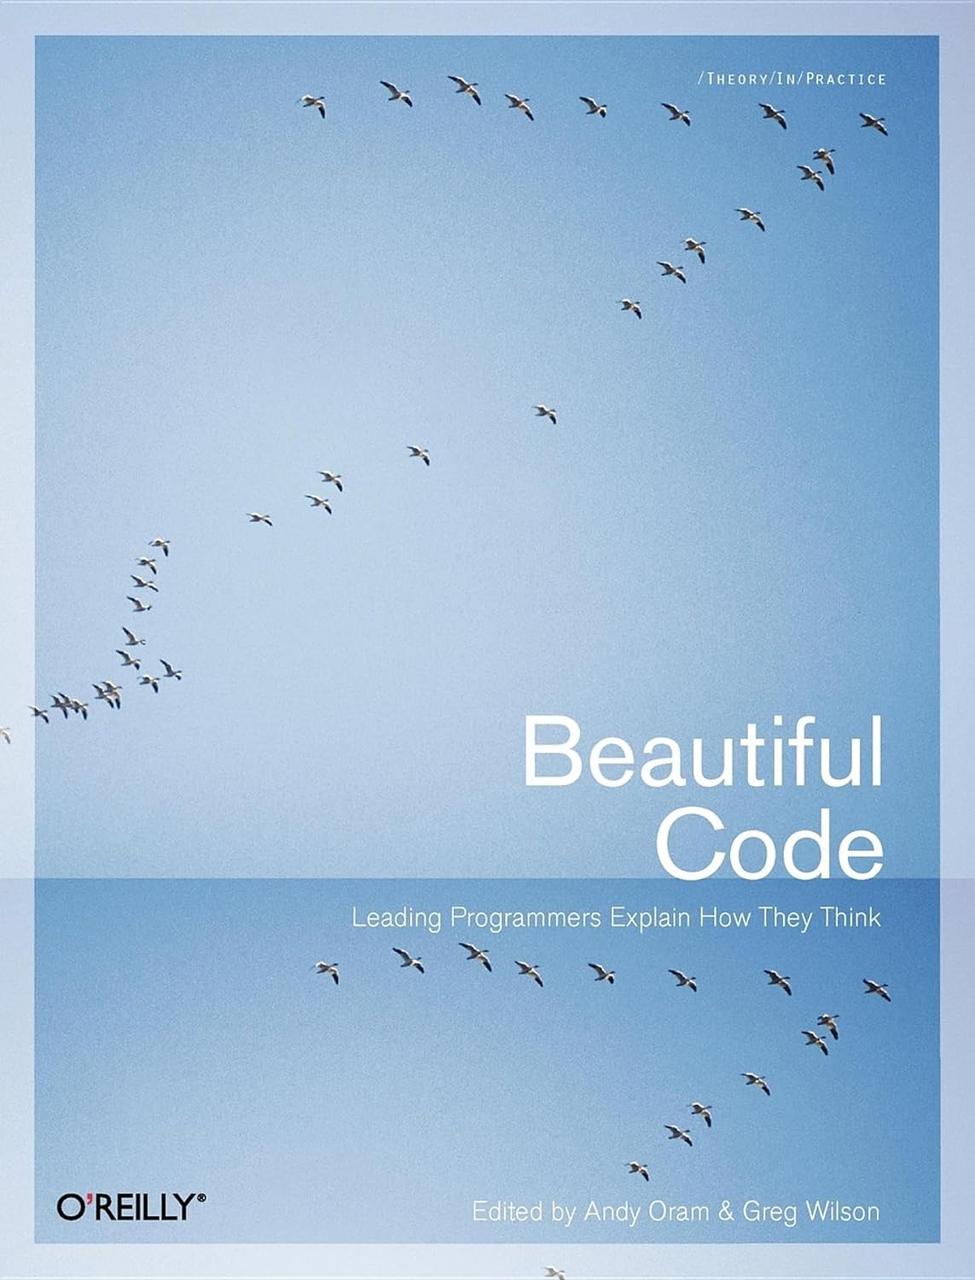 Beautiful Code: Leading Programmers Explain How They Think, Andy Oram, Greg Wilson